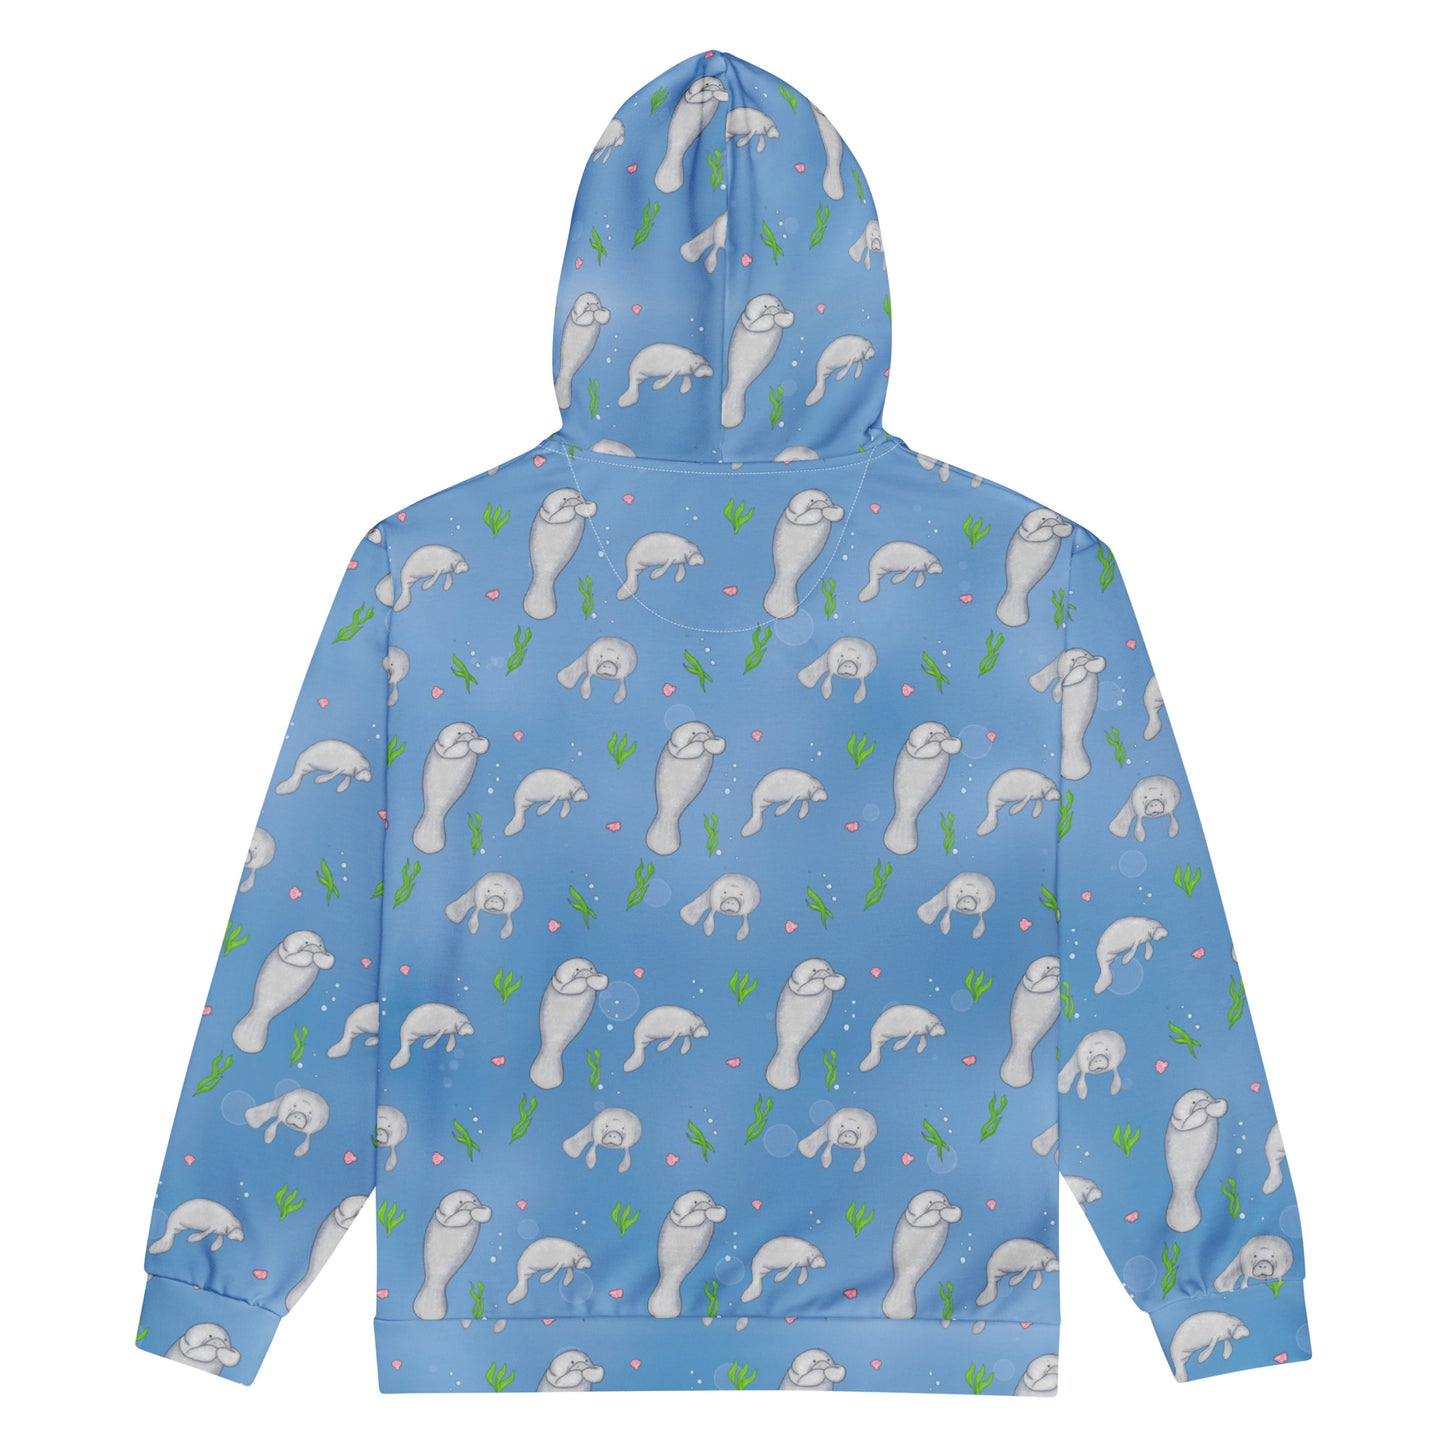 Unisex patterned manatee zip up hoodie. Made with recycled polyester. Soft cotton-feel outside fabric and fleece inside. Metal zipper, eyelets, and drawcord tips. Back view.